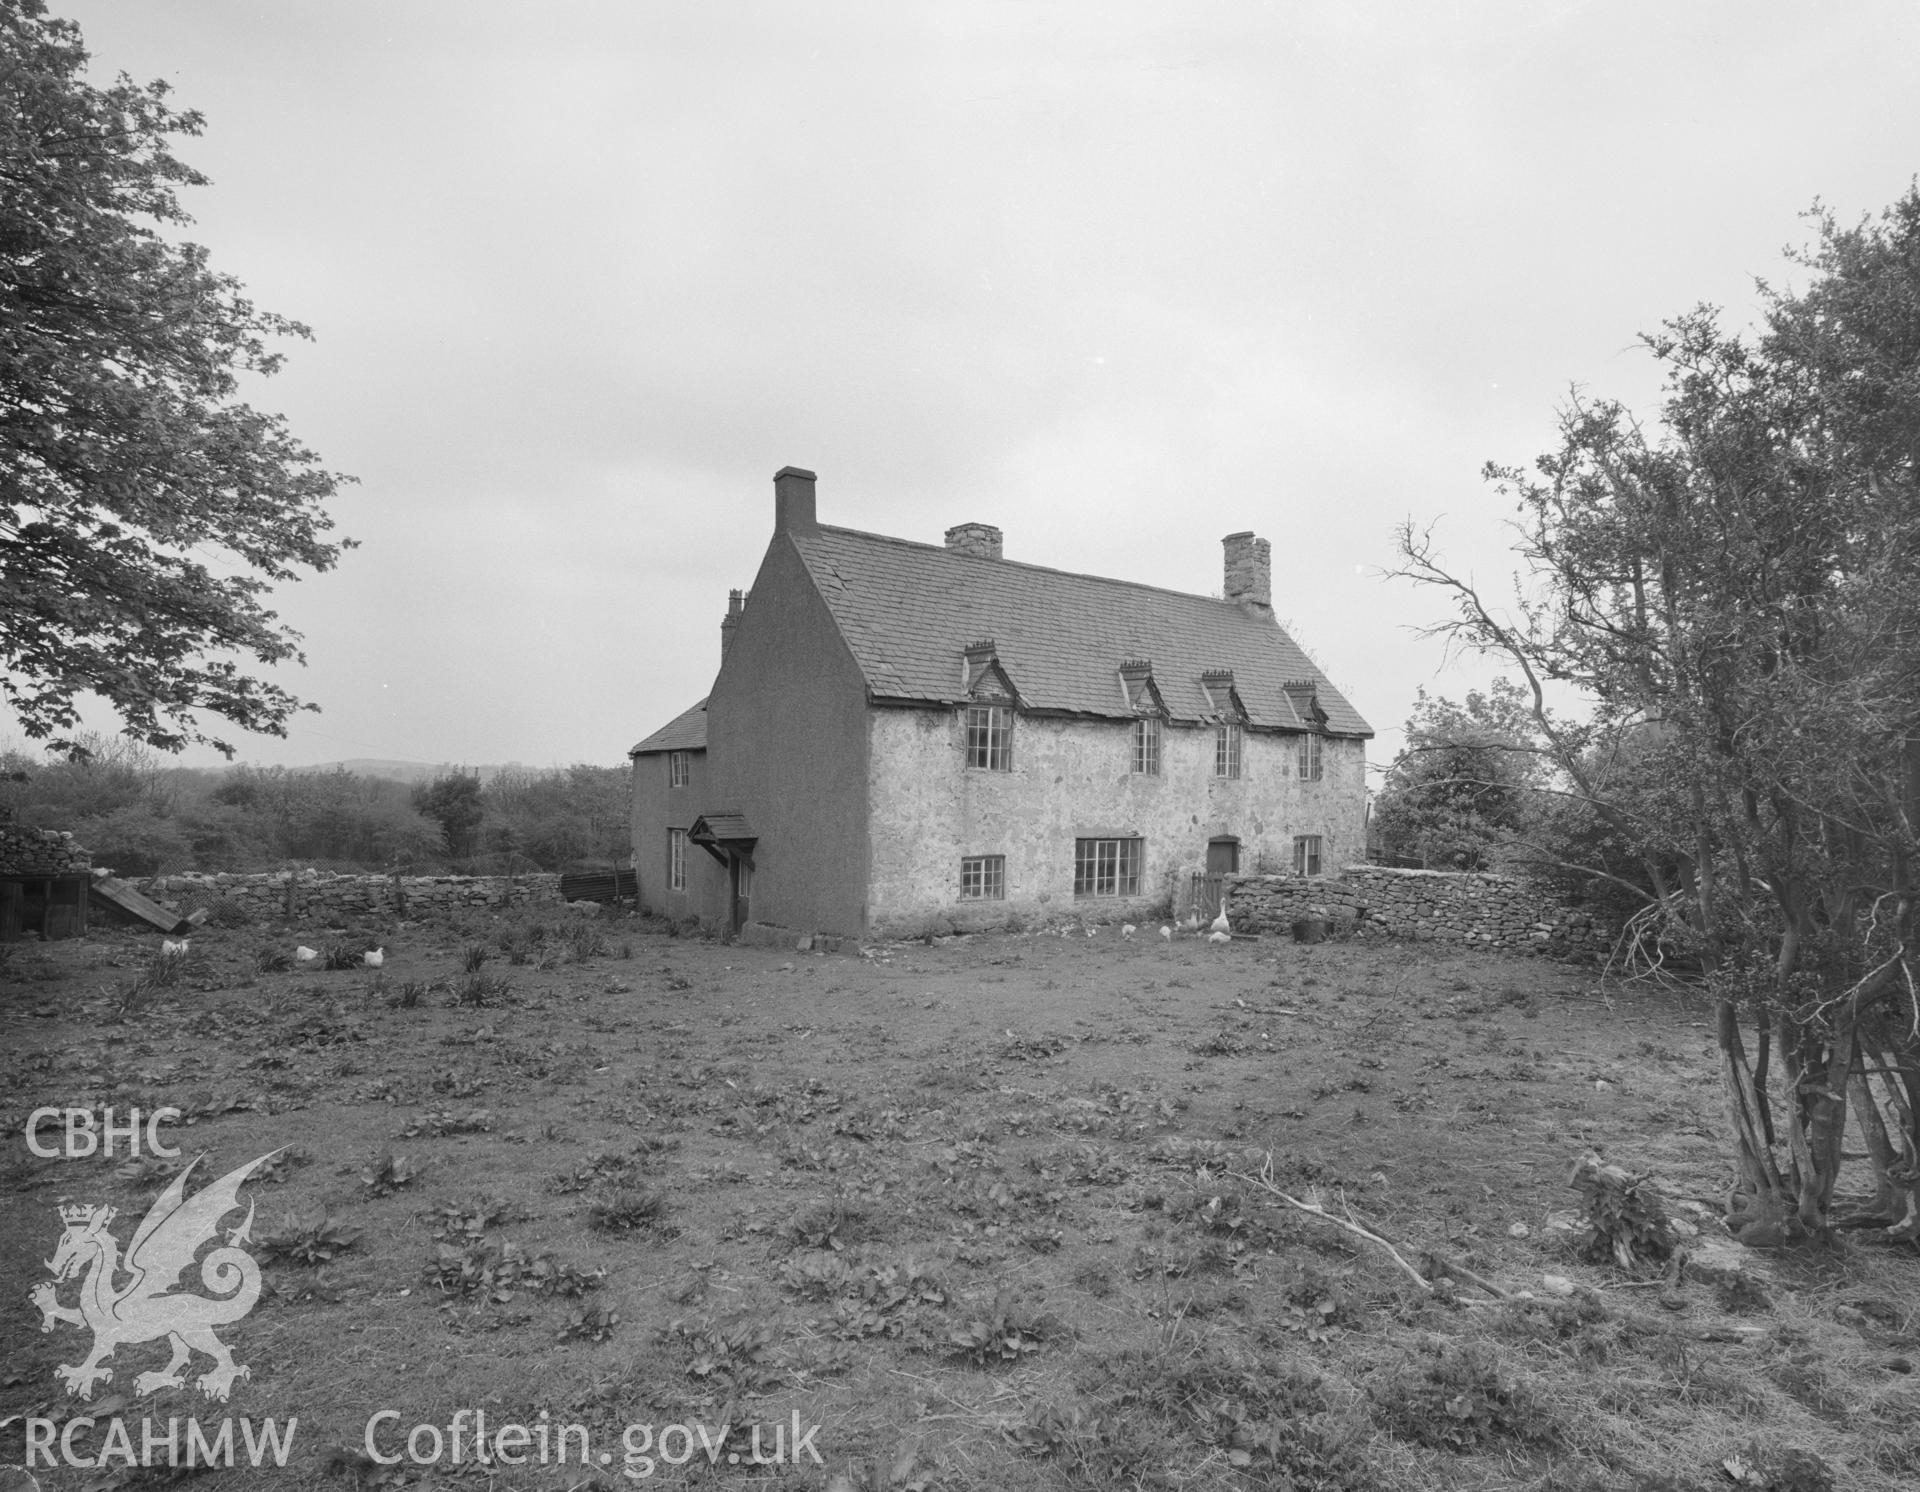 Digital copy of a black and white negative showing an exterior view of Pen y Cefn, Flintshire.